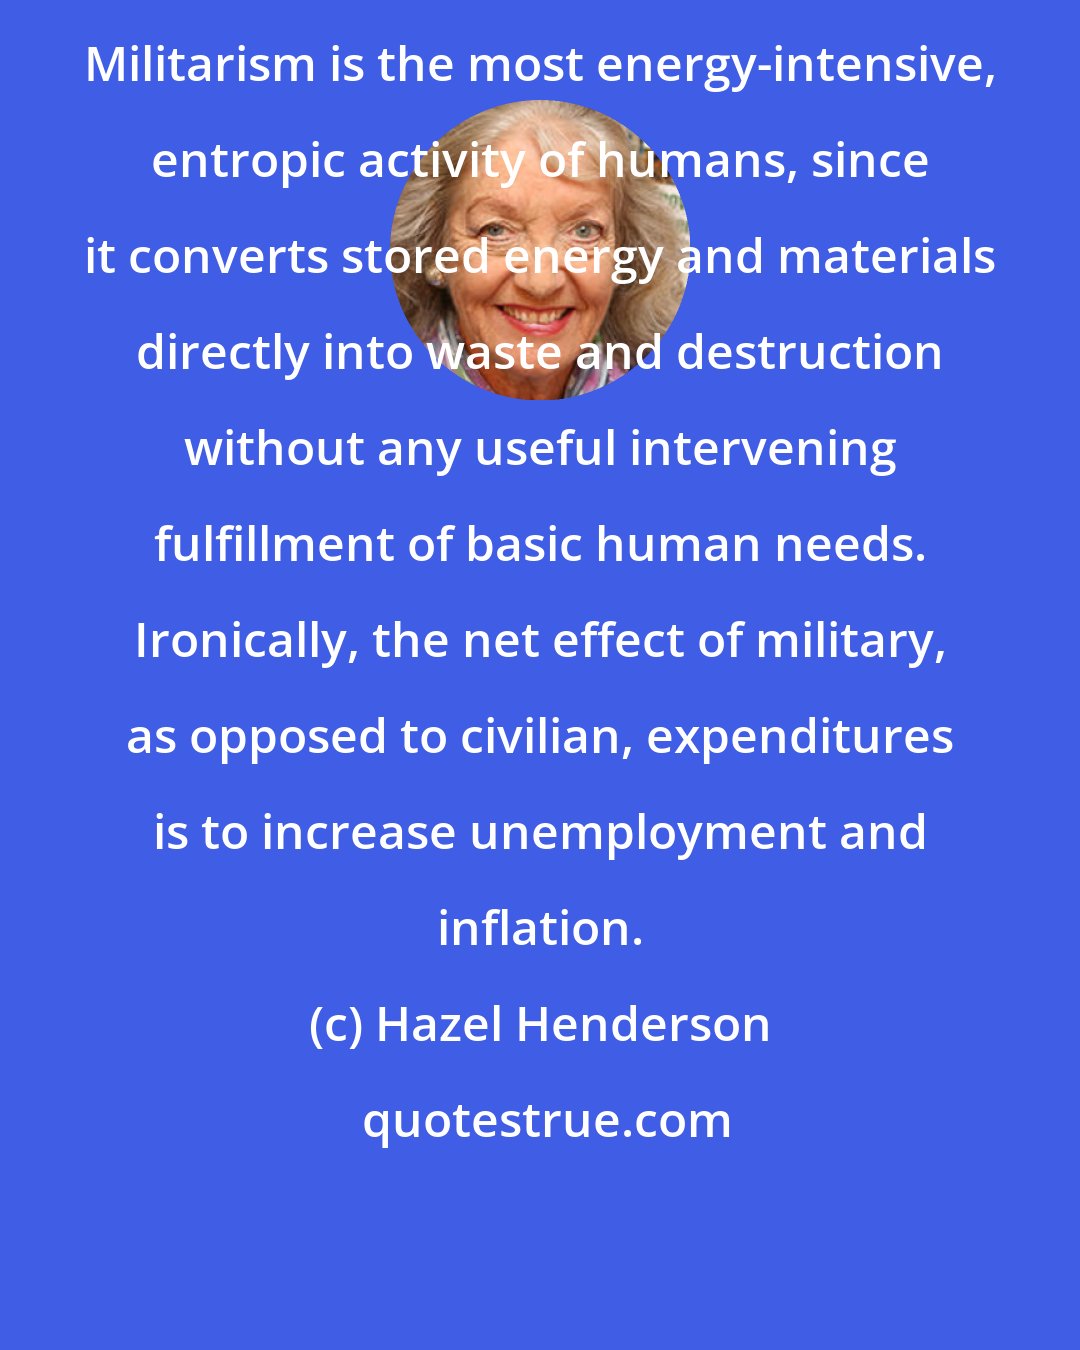 Hazel Henderson: Militarism is the most energy-intensive, entropic activity of humans, since it converts stored energy and materials directly into waste and destruction without any useful intervening fulfillment of basic human needs. Ironically, the net effect of military, as opposed to civilian, expenditures is to increase unemployment and inflation.